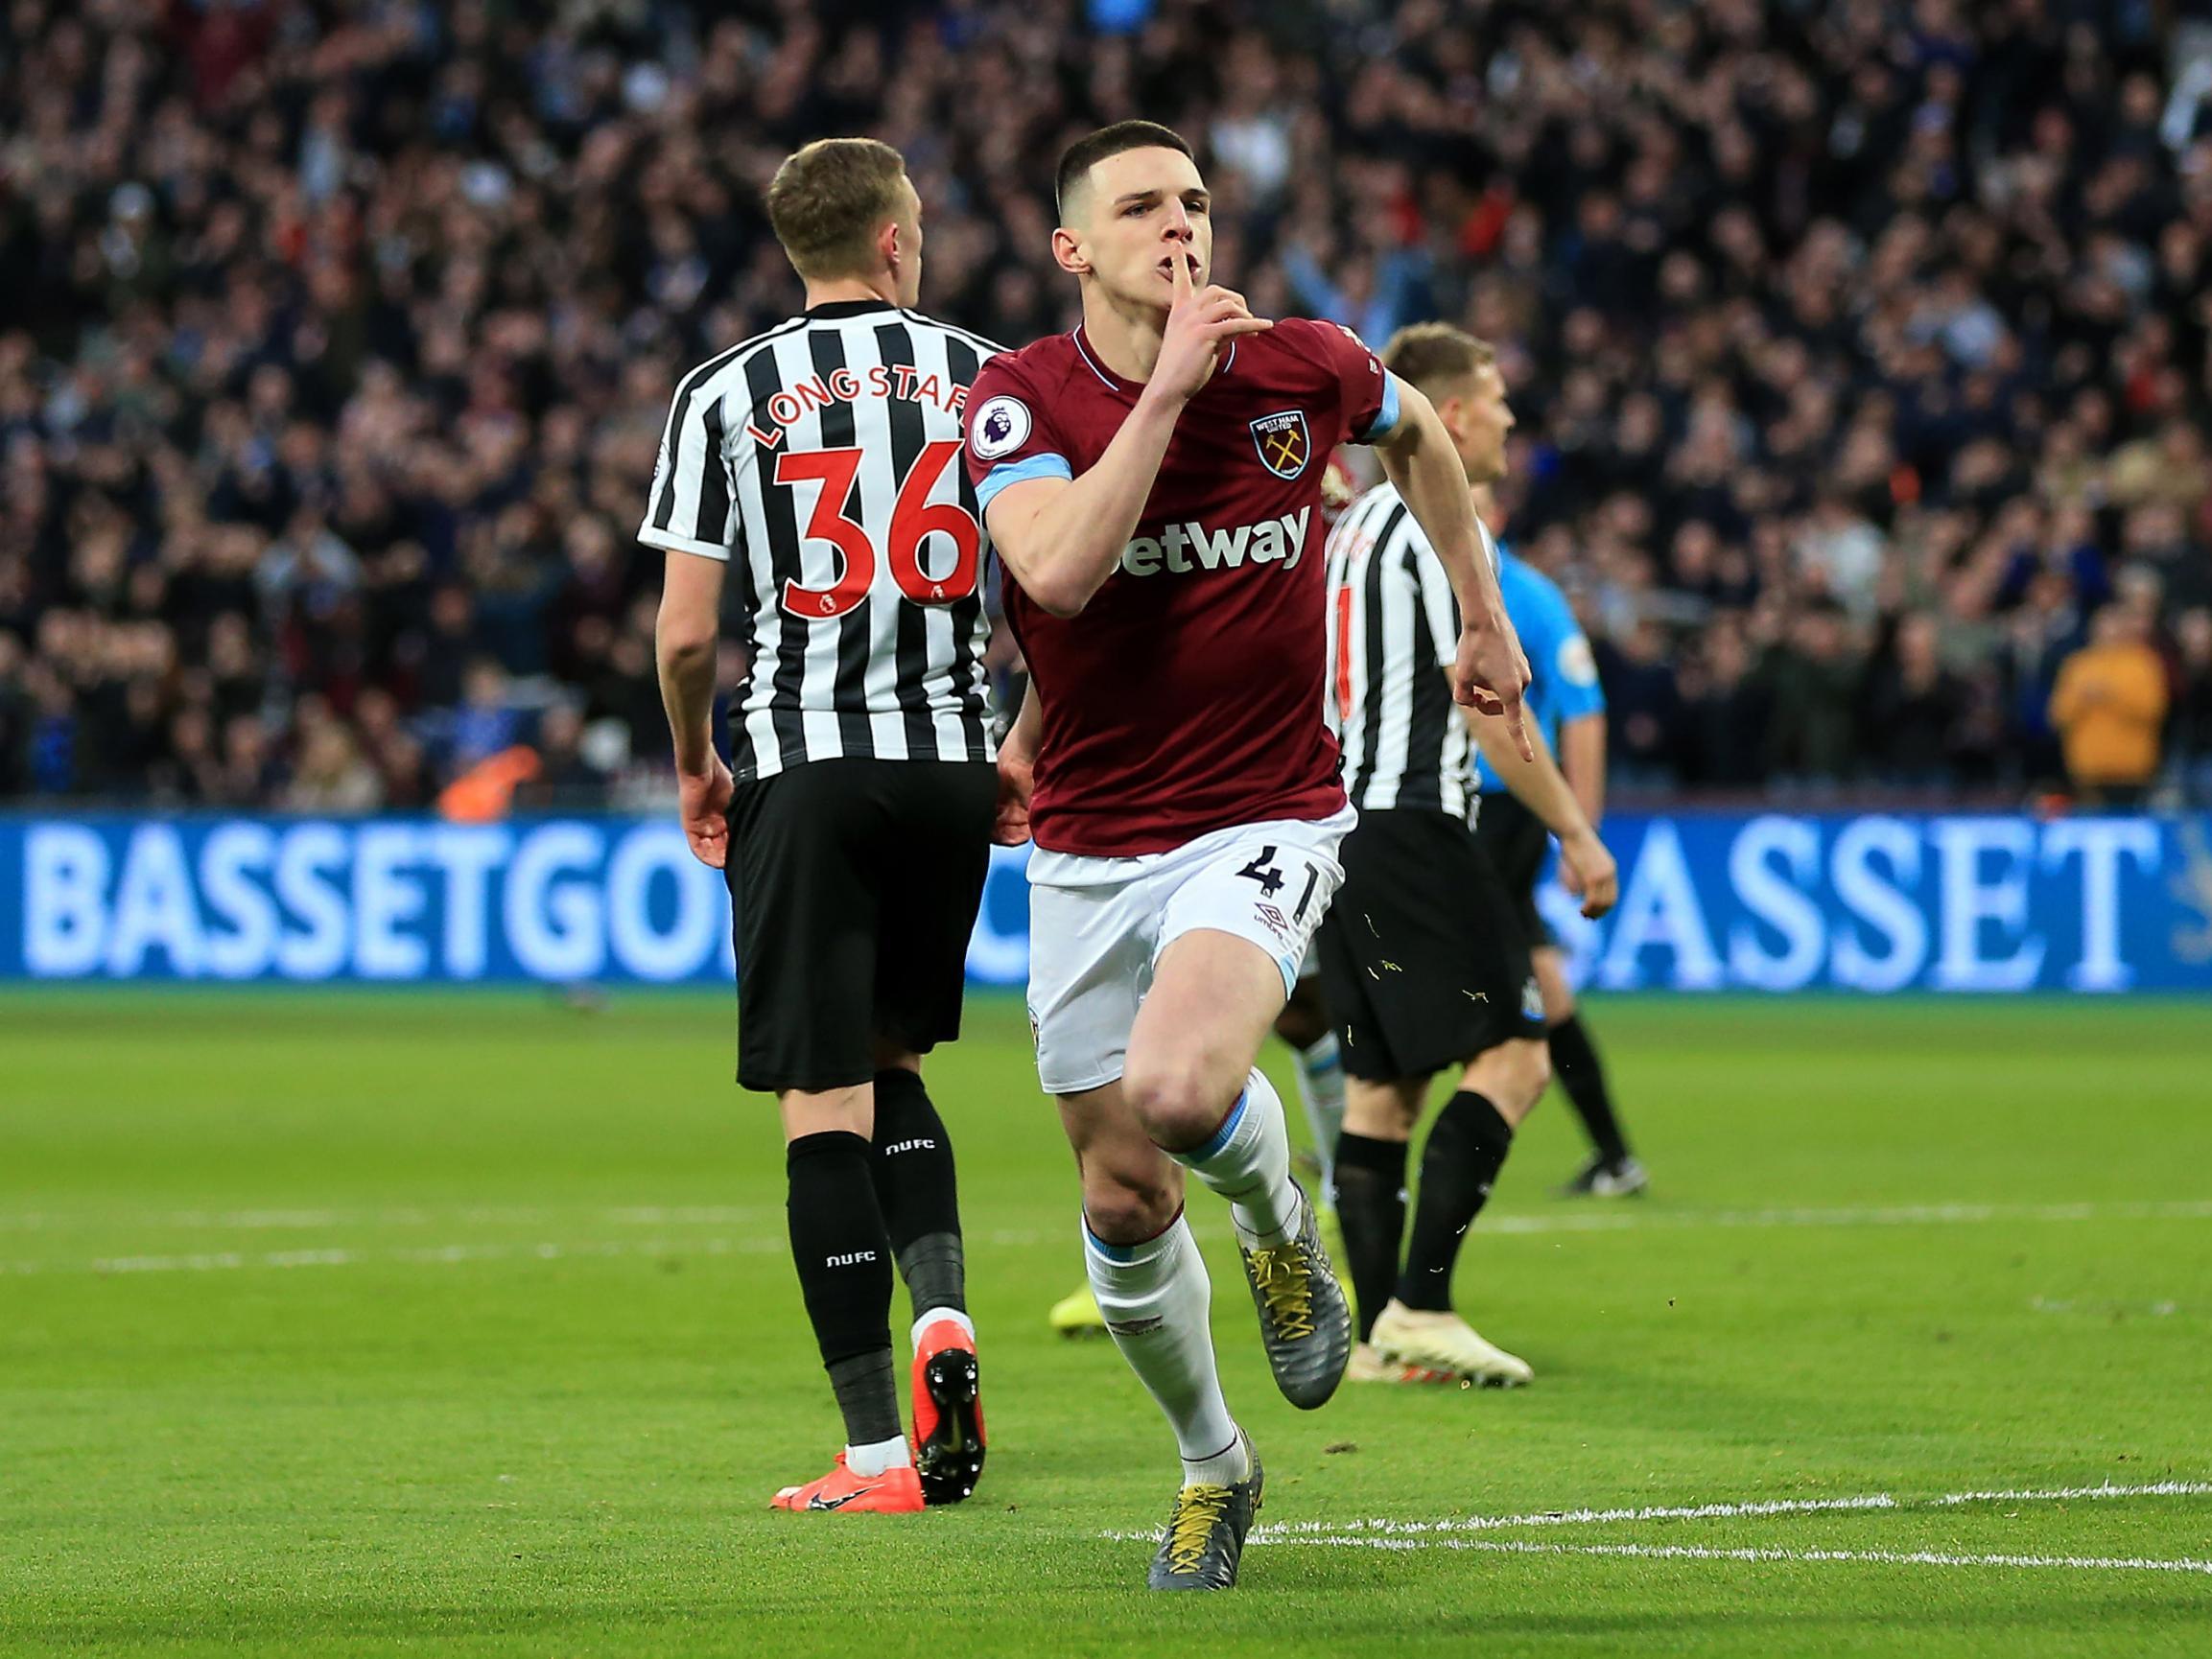 Declan Rice put West Ham ahead after just seven minutes